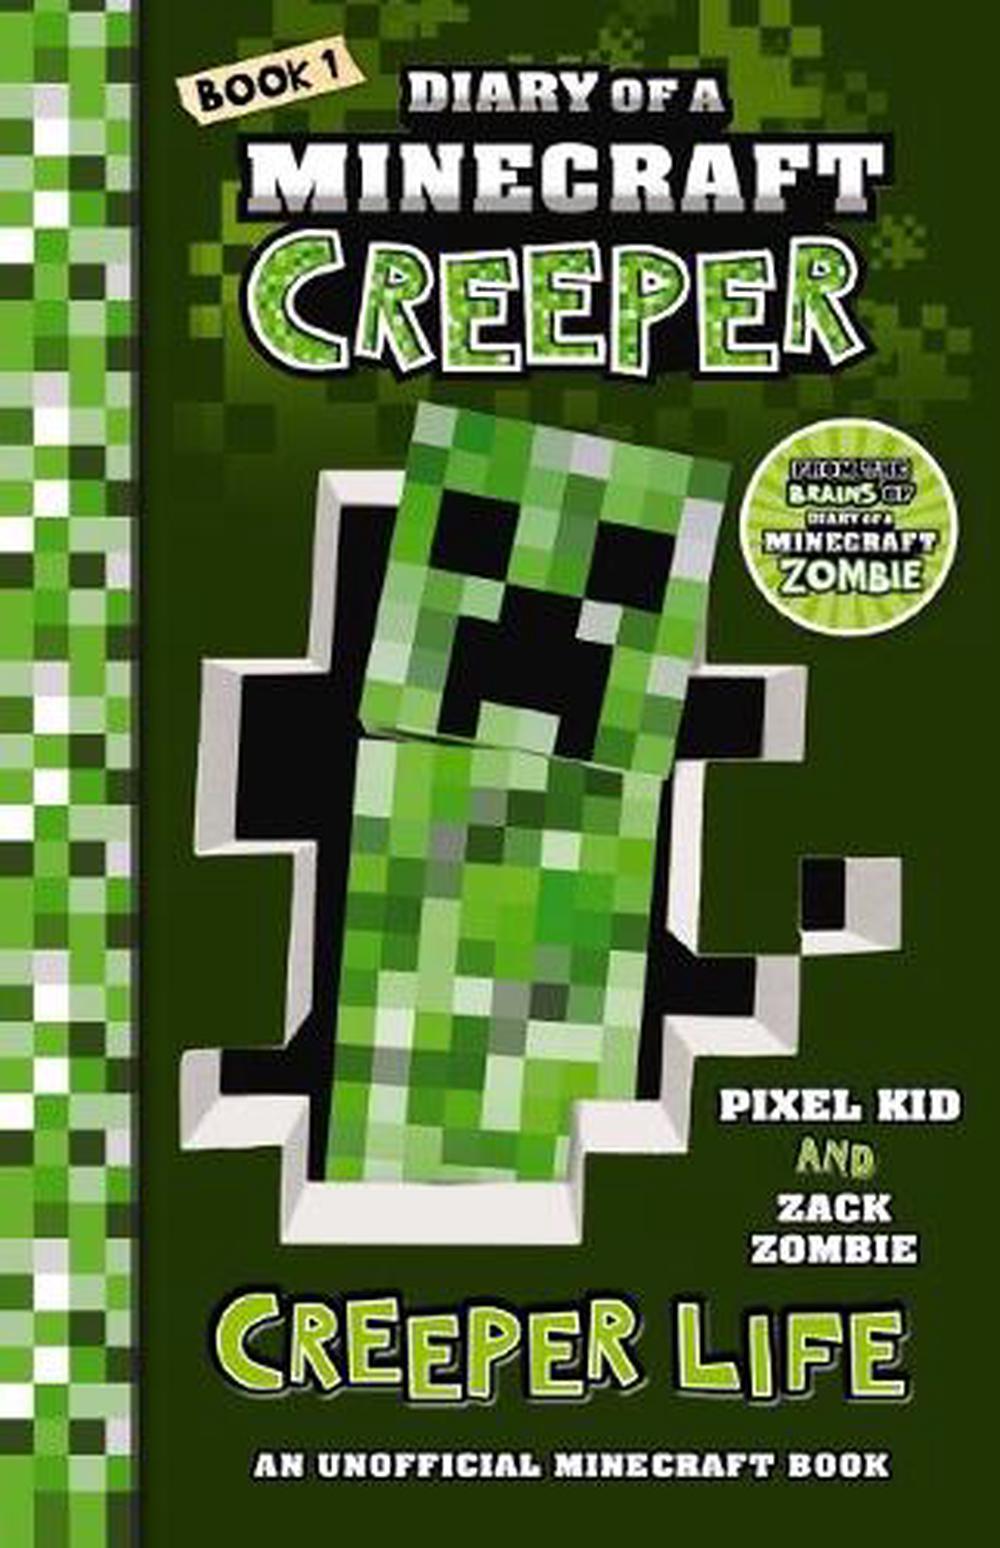 Diary of a Minecraft Creeper 1 Creeper Life by Zack Zombie, Paperback